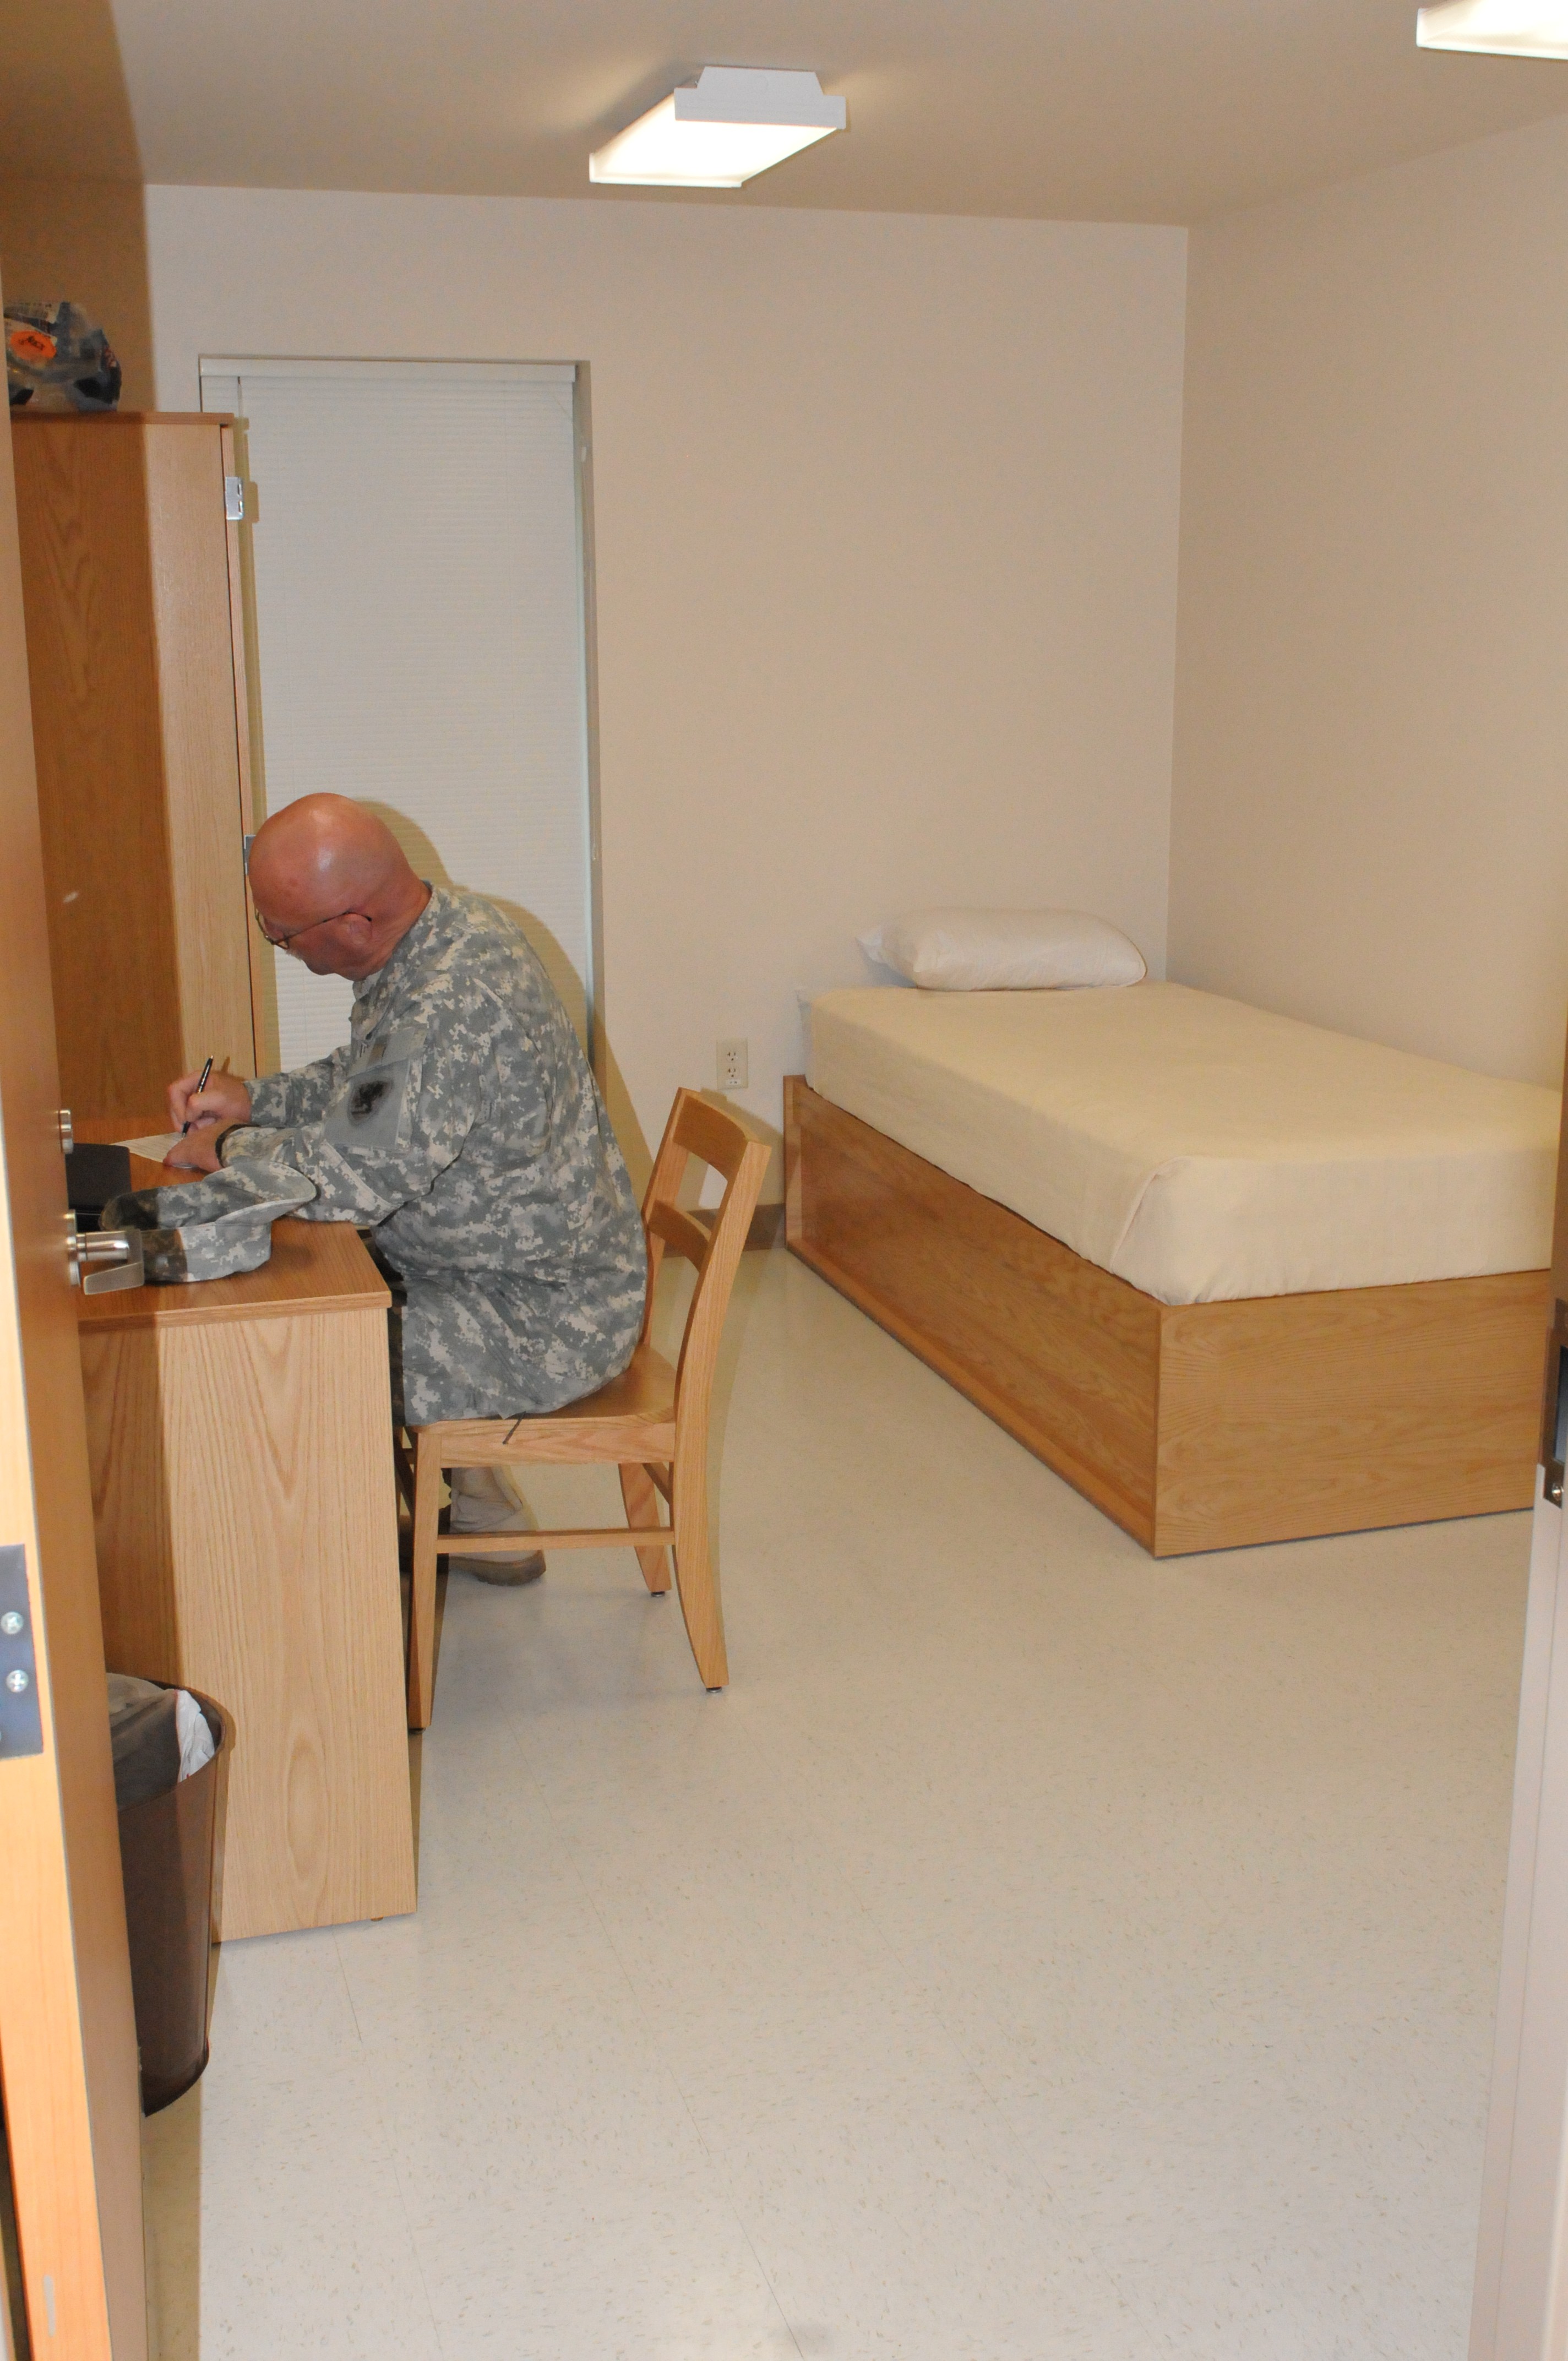 Defeated smoke Wardrobe Renovated Military Barracks Open at Depot | Article | The United States Army